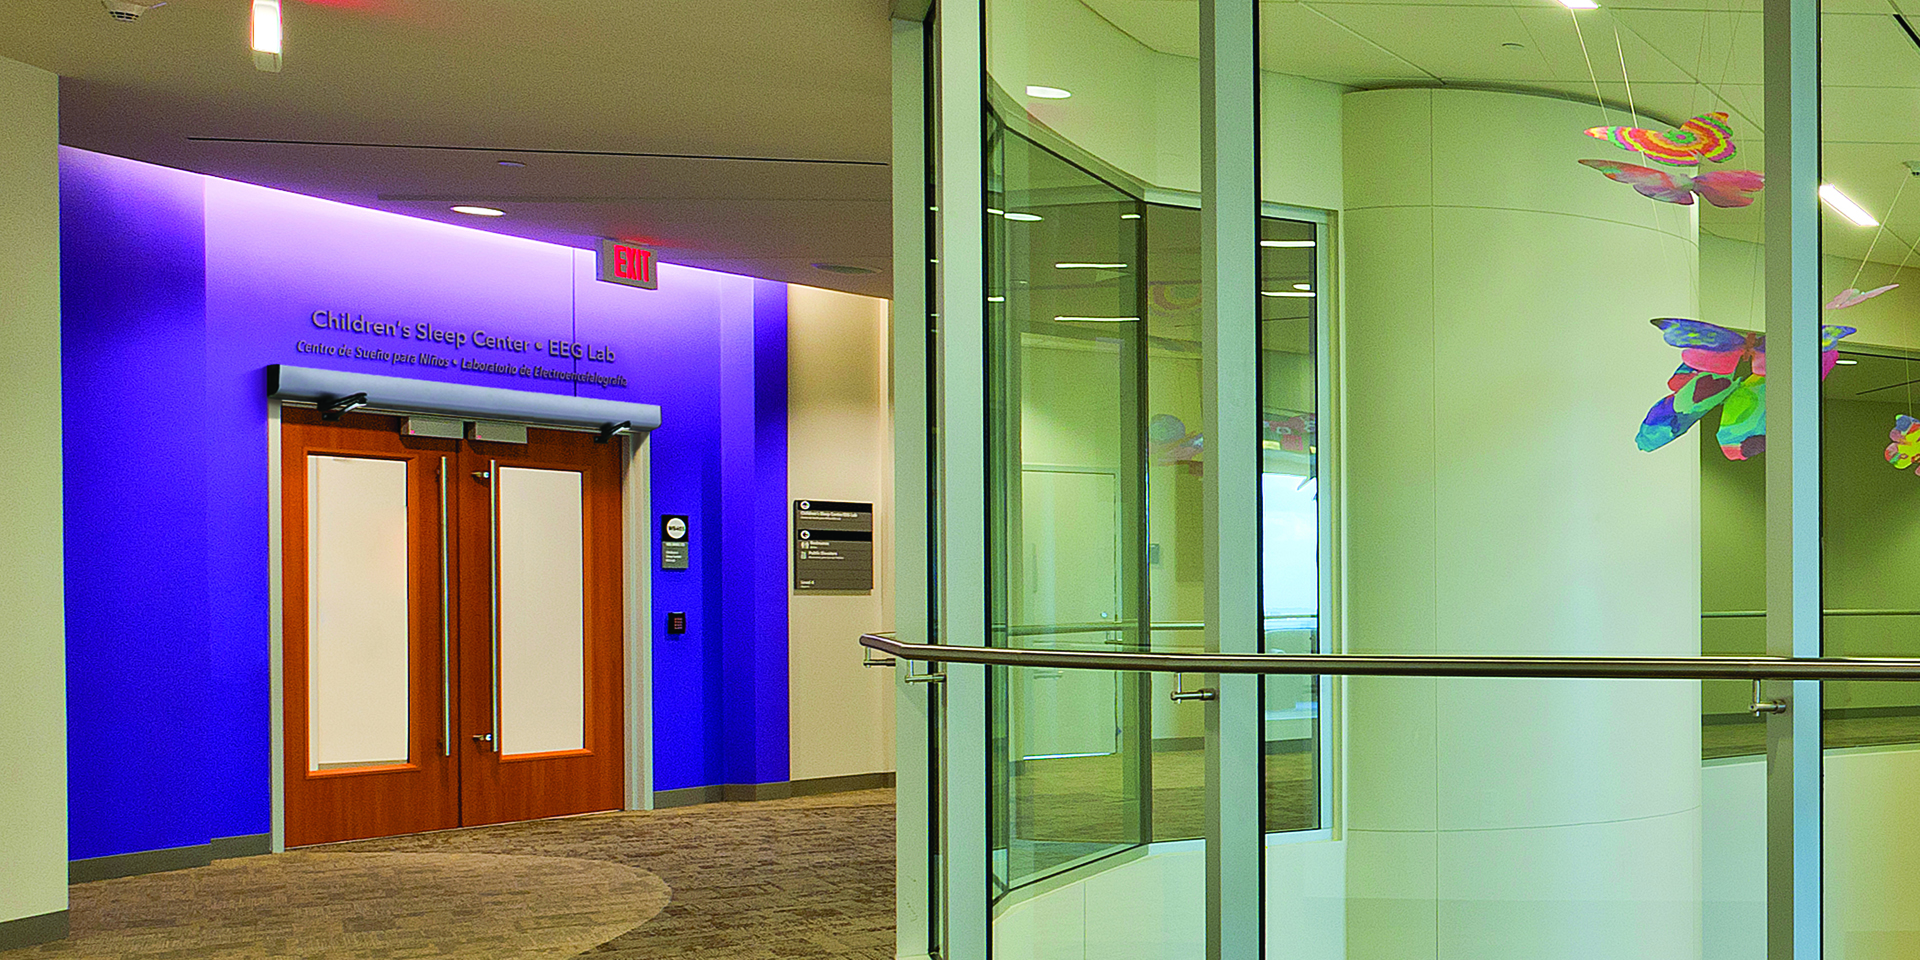 Things to Consider While Selecting the Automatic Door Operators